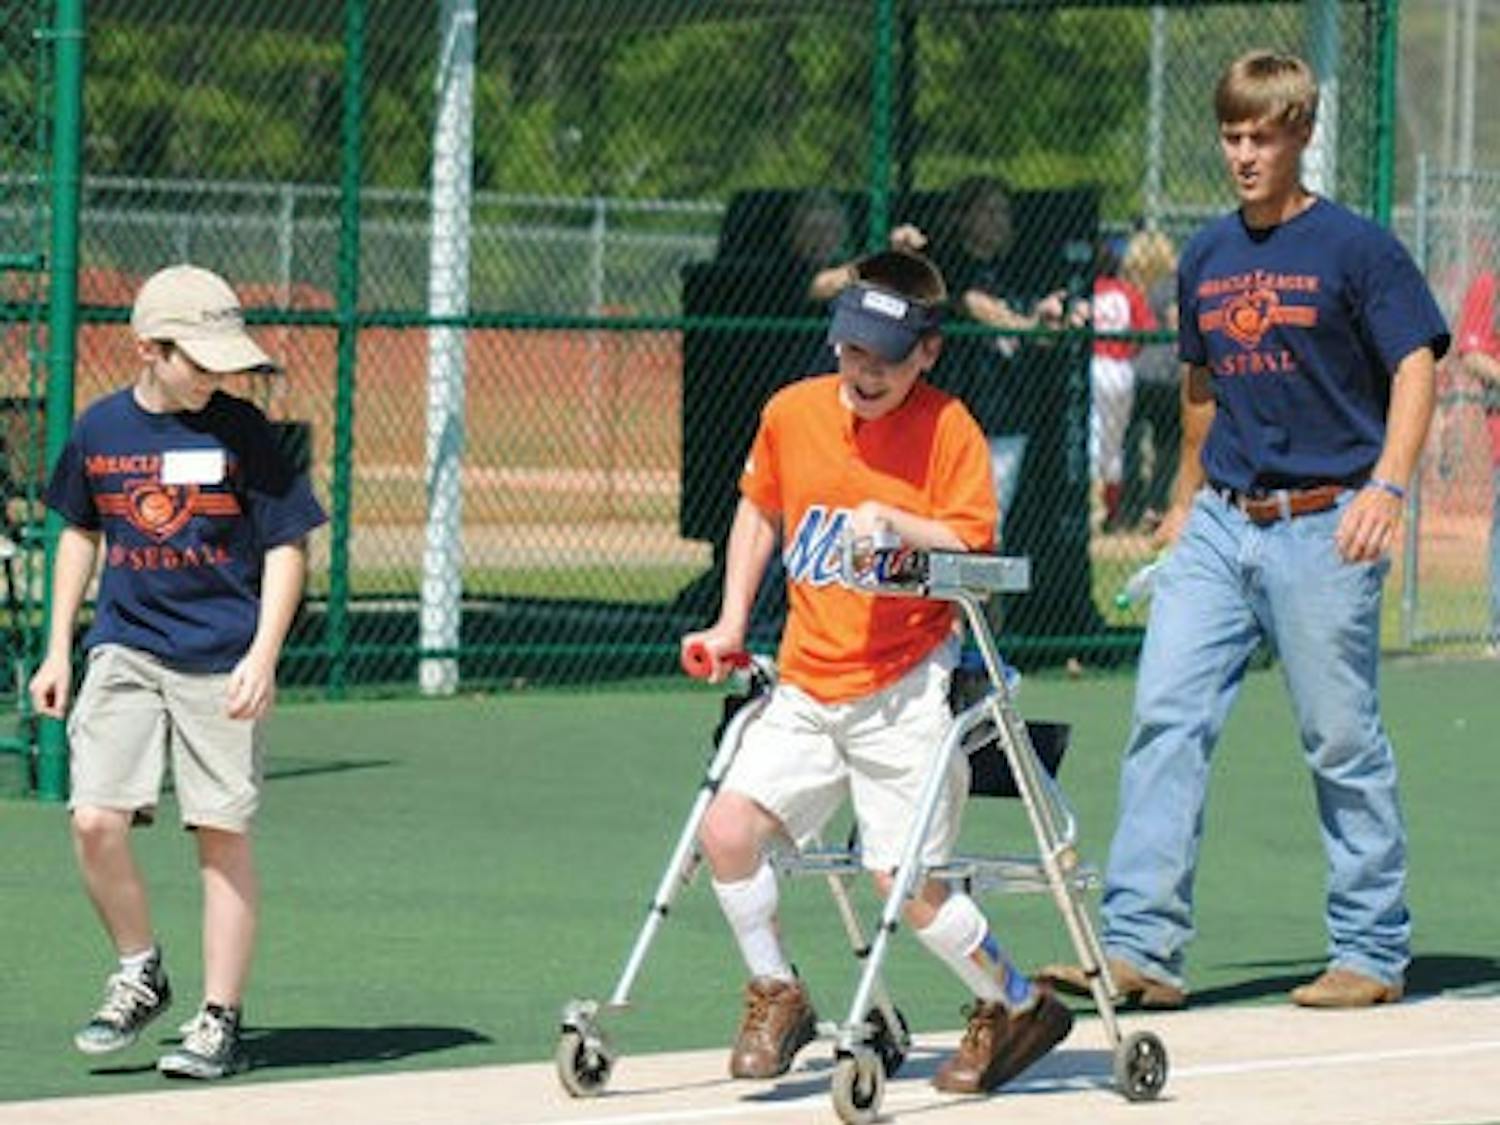 Gunter Nawrocki scores a run for the Mets Sunday at Billy Hitchcock Miracle Field, part of the West Ridge Baseball Complex in Opelika. (Maria Iampietro / Associate Photo Editor)